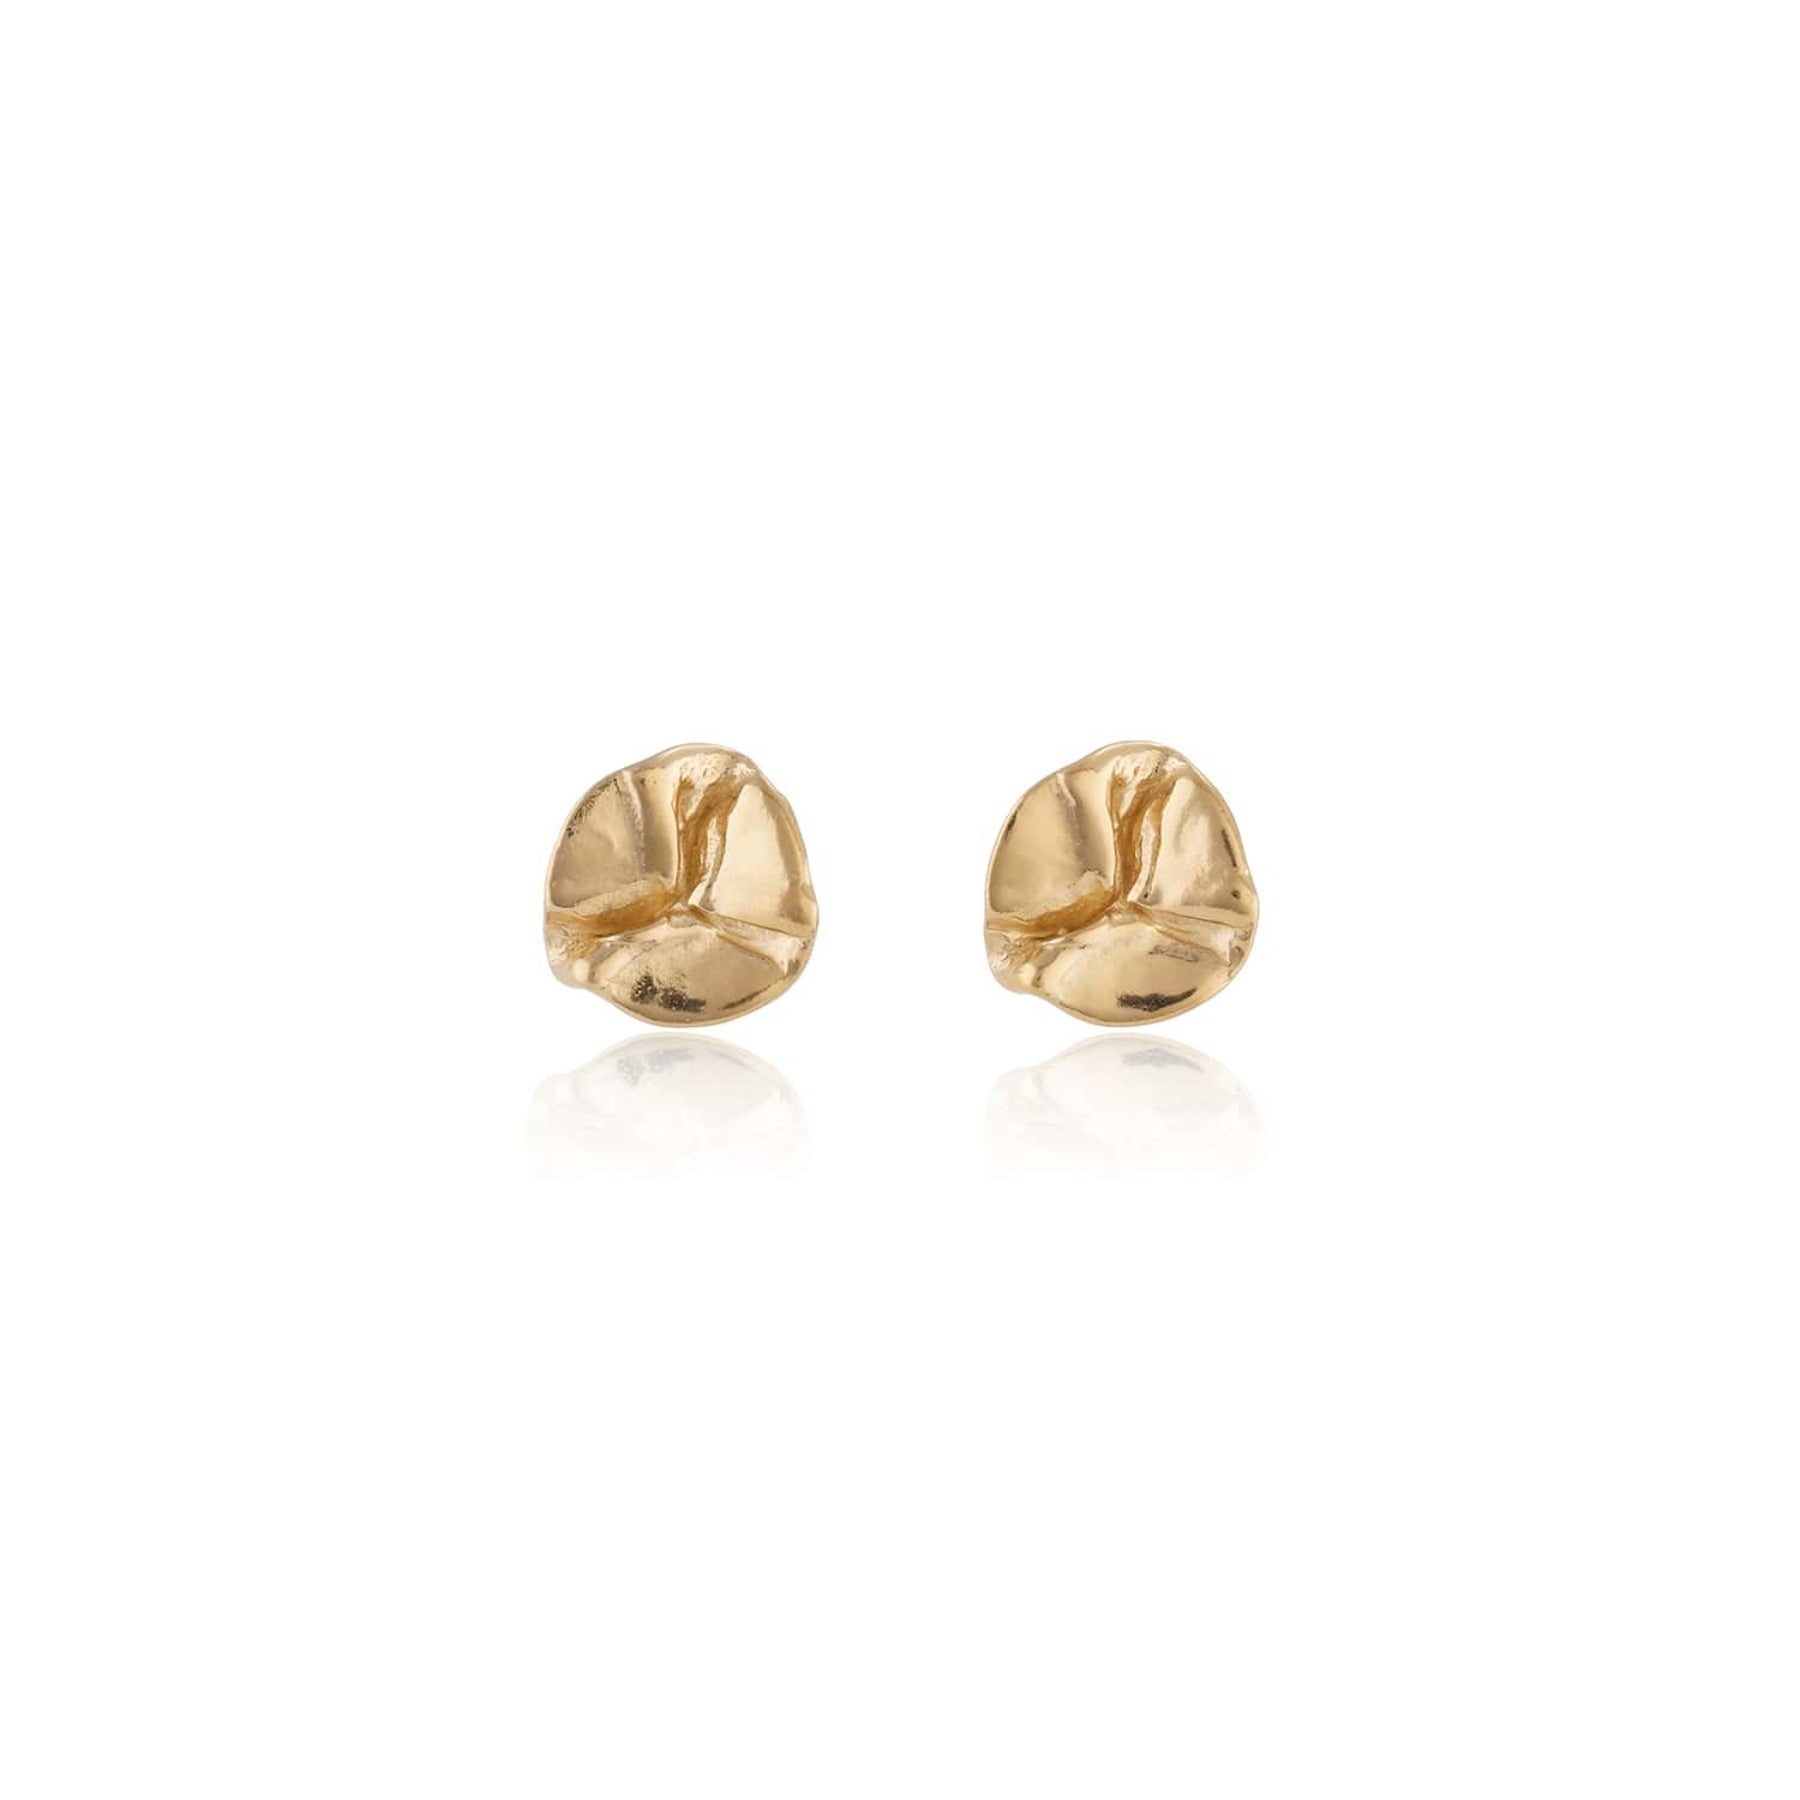 Small abstract round studs with a sculptural, creased design inspired by water lilies in 18k gold vermeil.